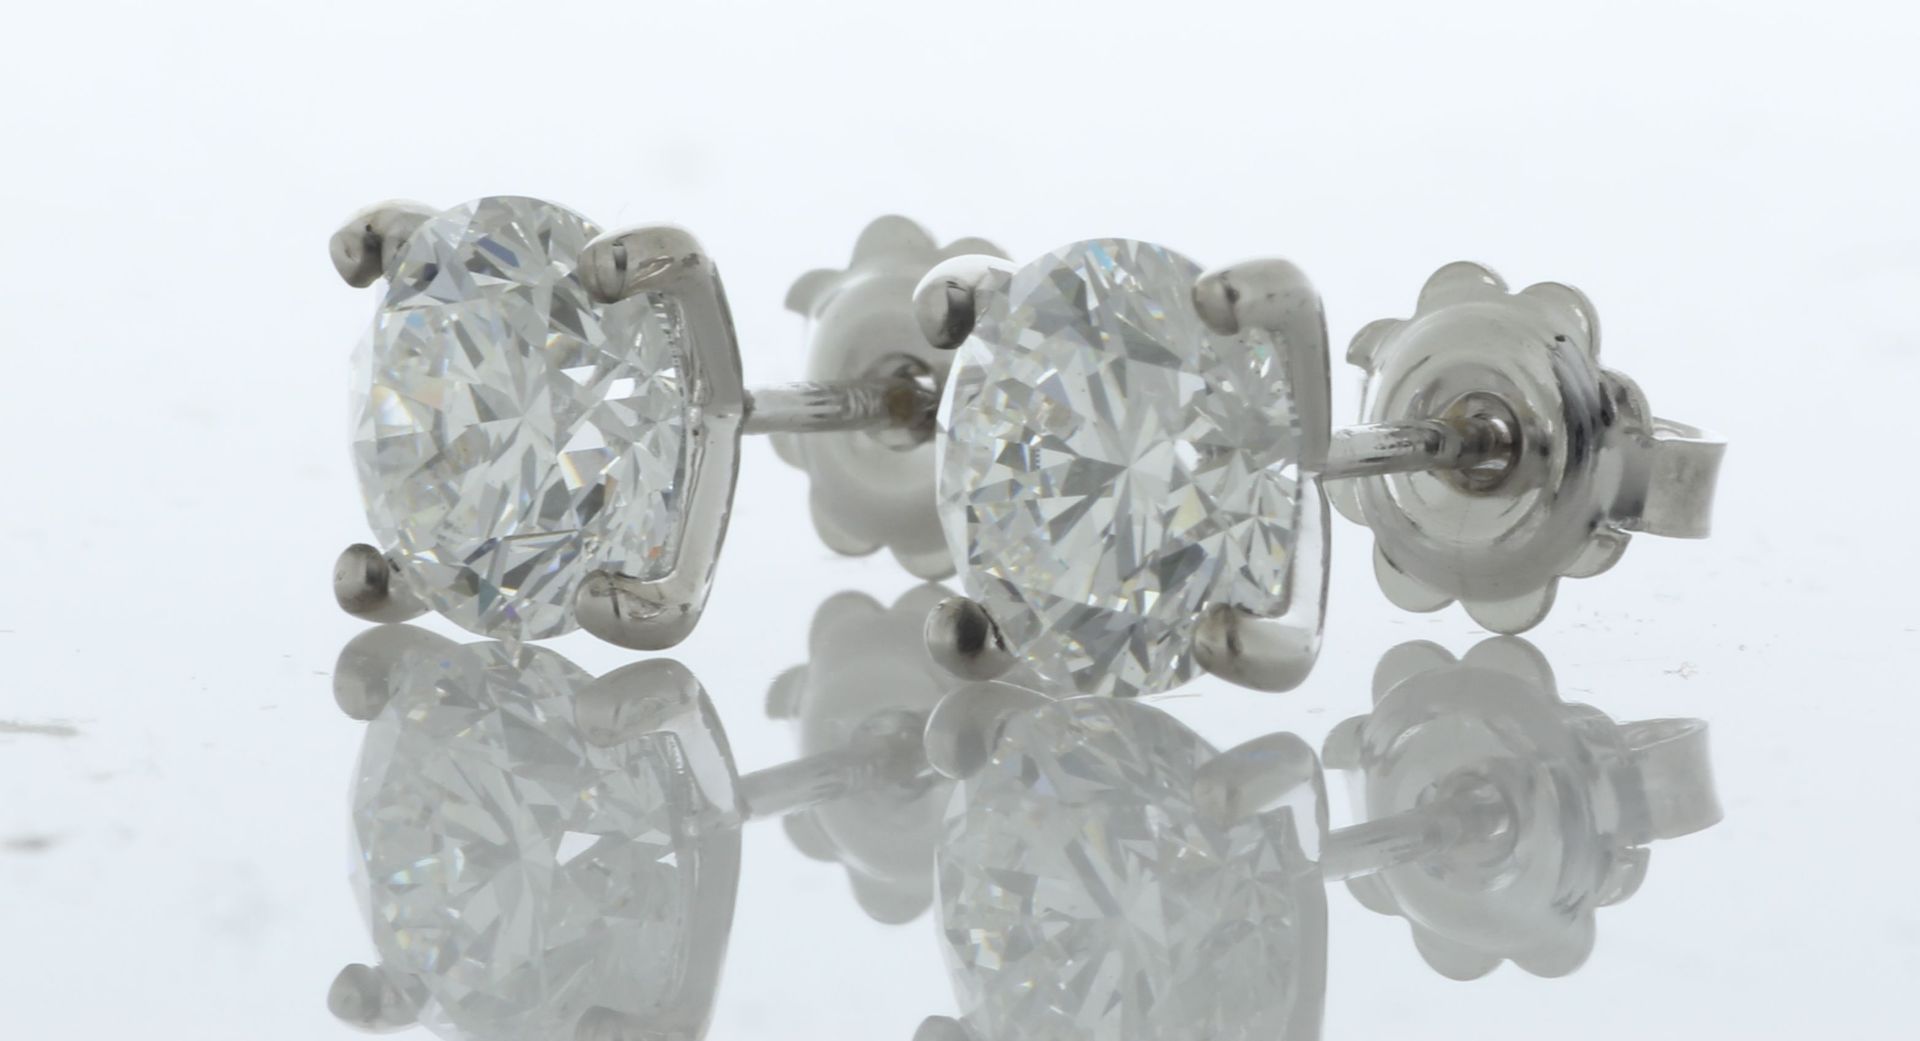 18ct White Gold LAB GROWN Diamond Earrings 3.40 Carats - Valued By AGI £28,340.00 - Two stunning - Image 2 of 4